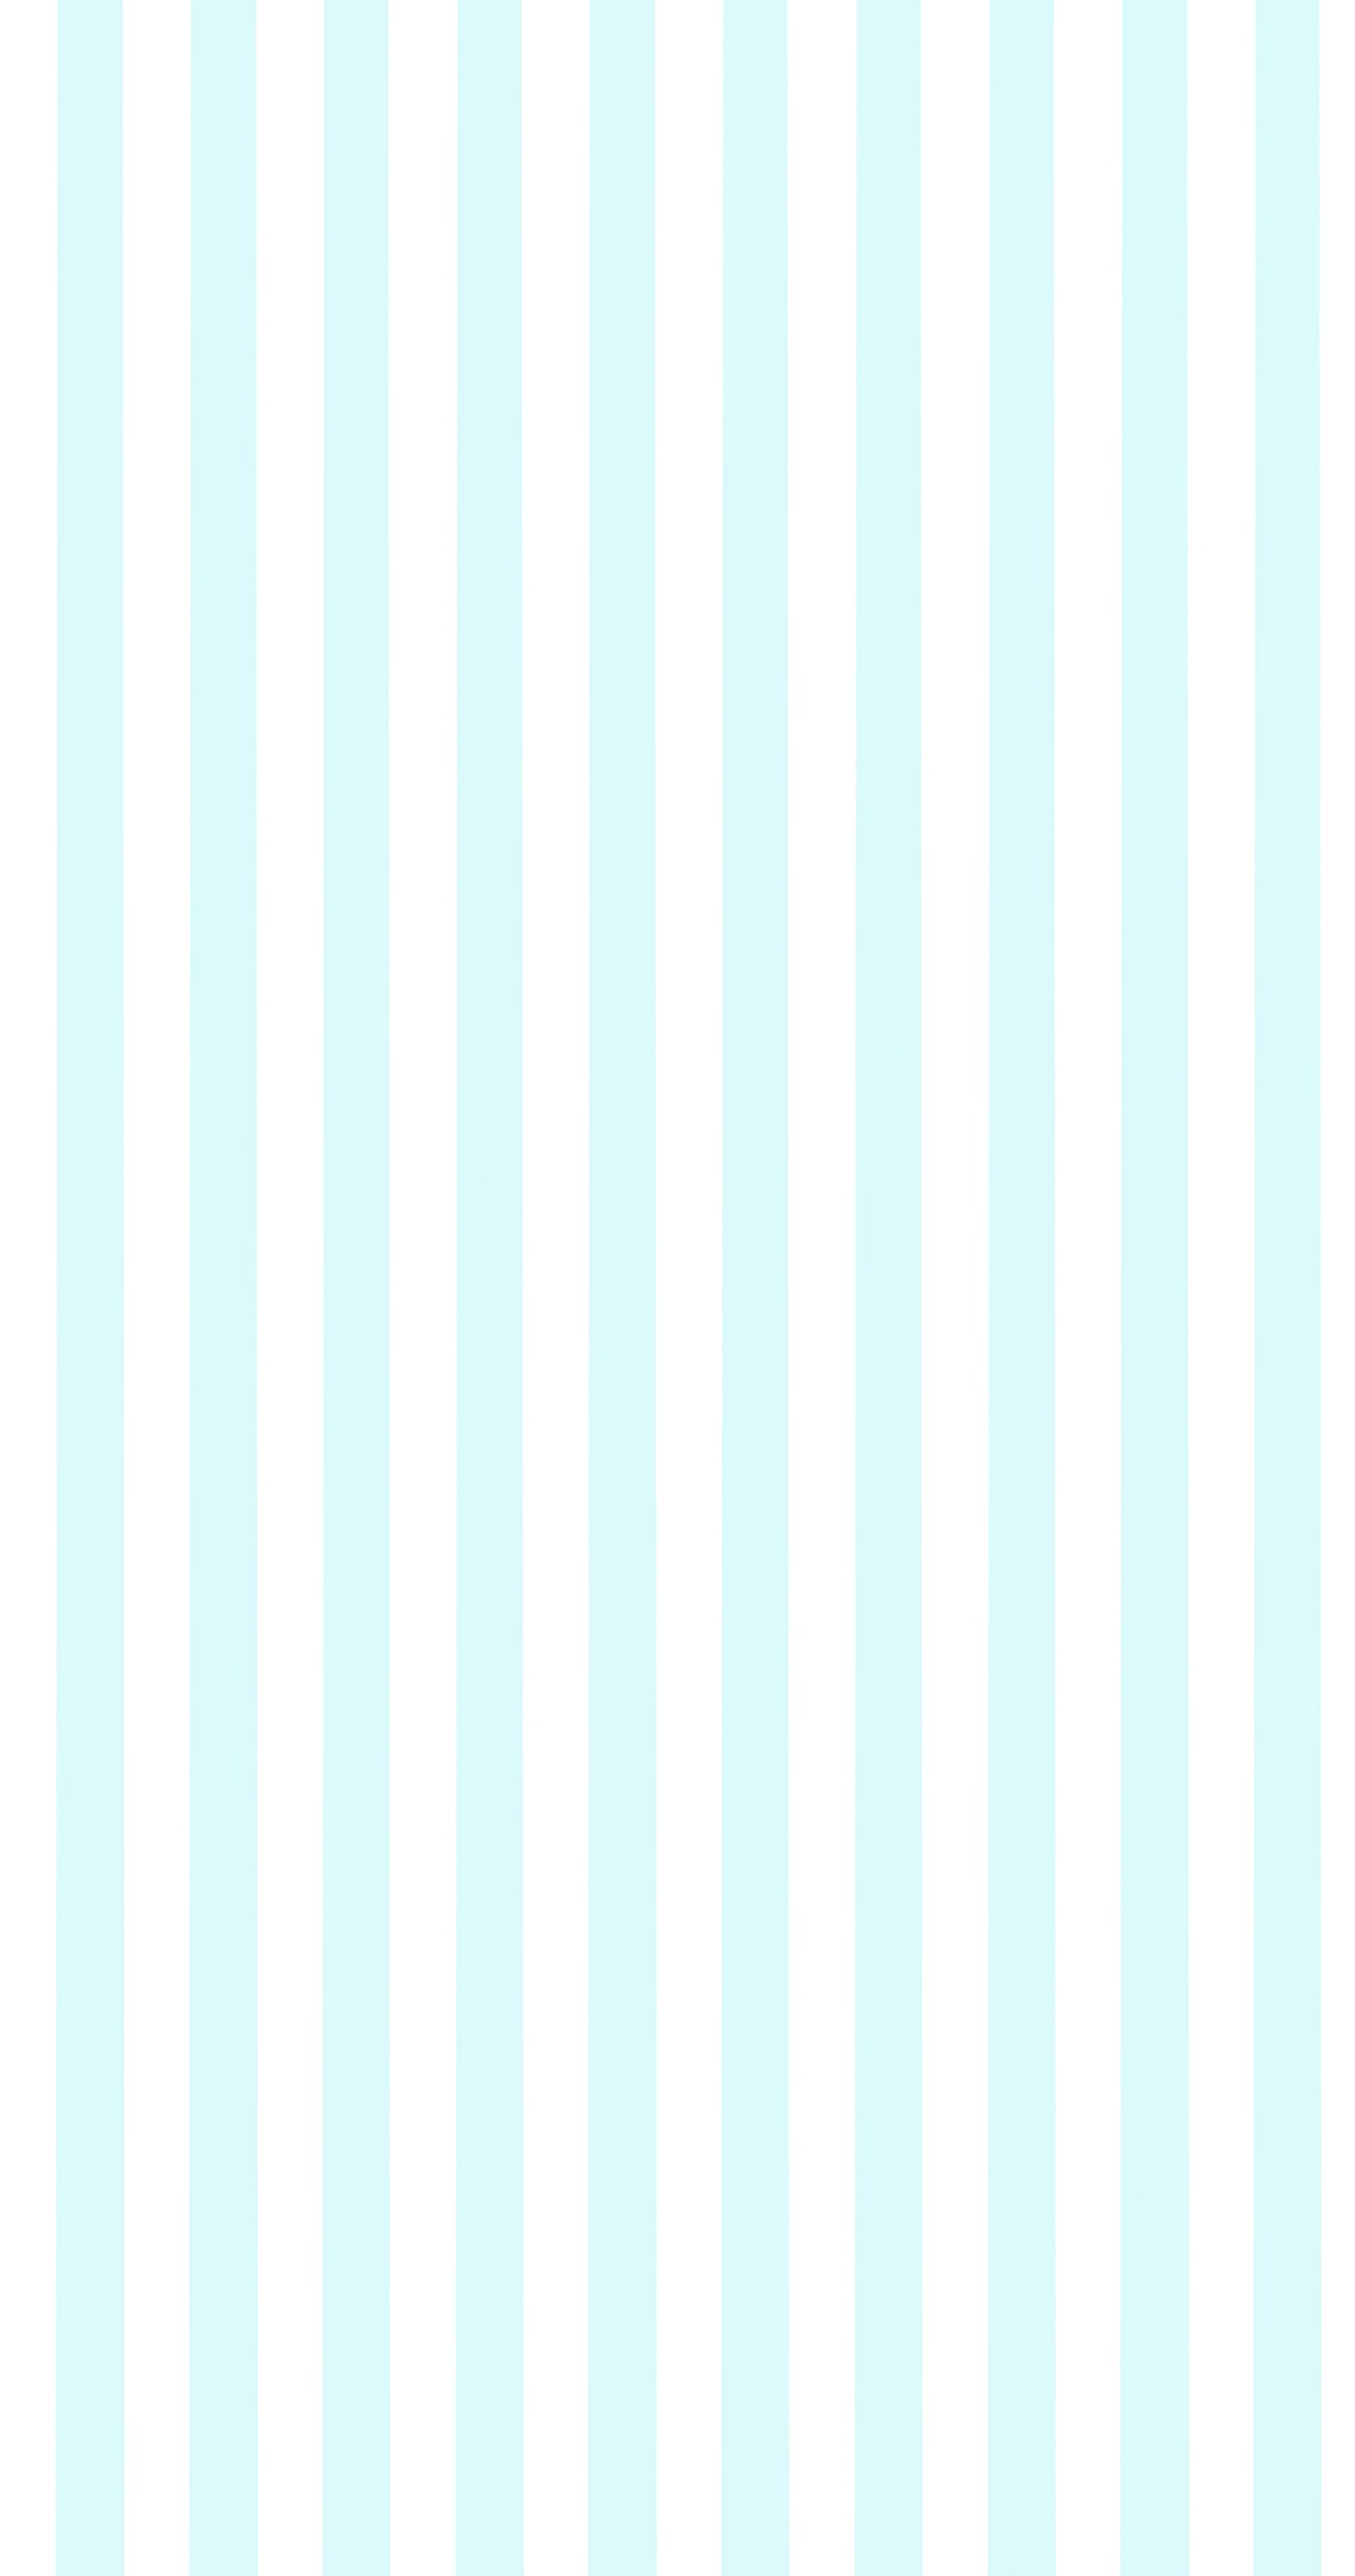 Blue and White Stripes Background by sophiesuds on DeviantArt